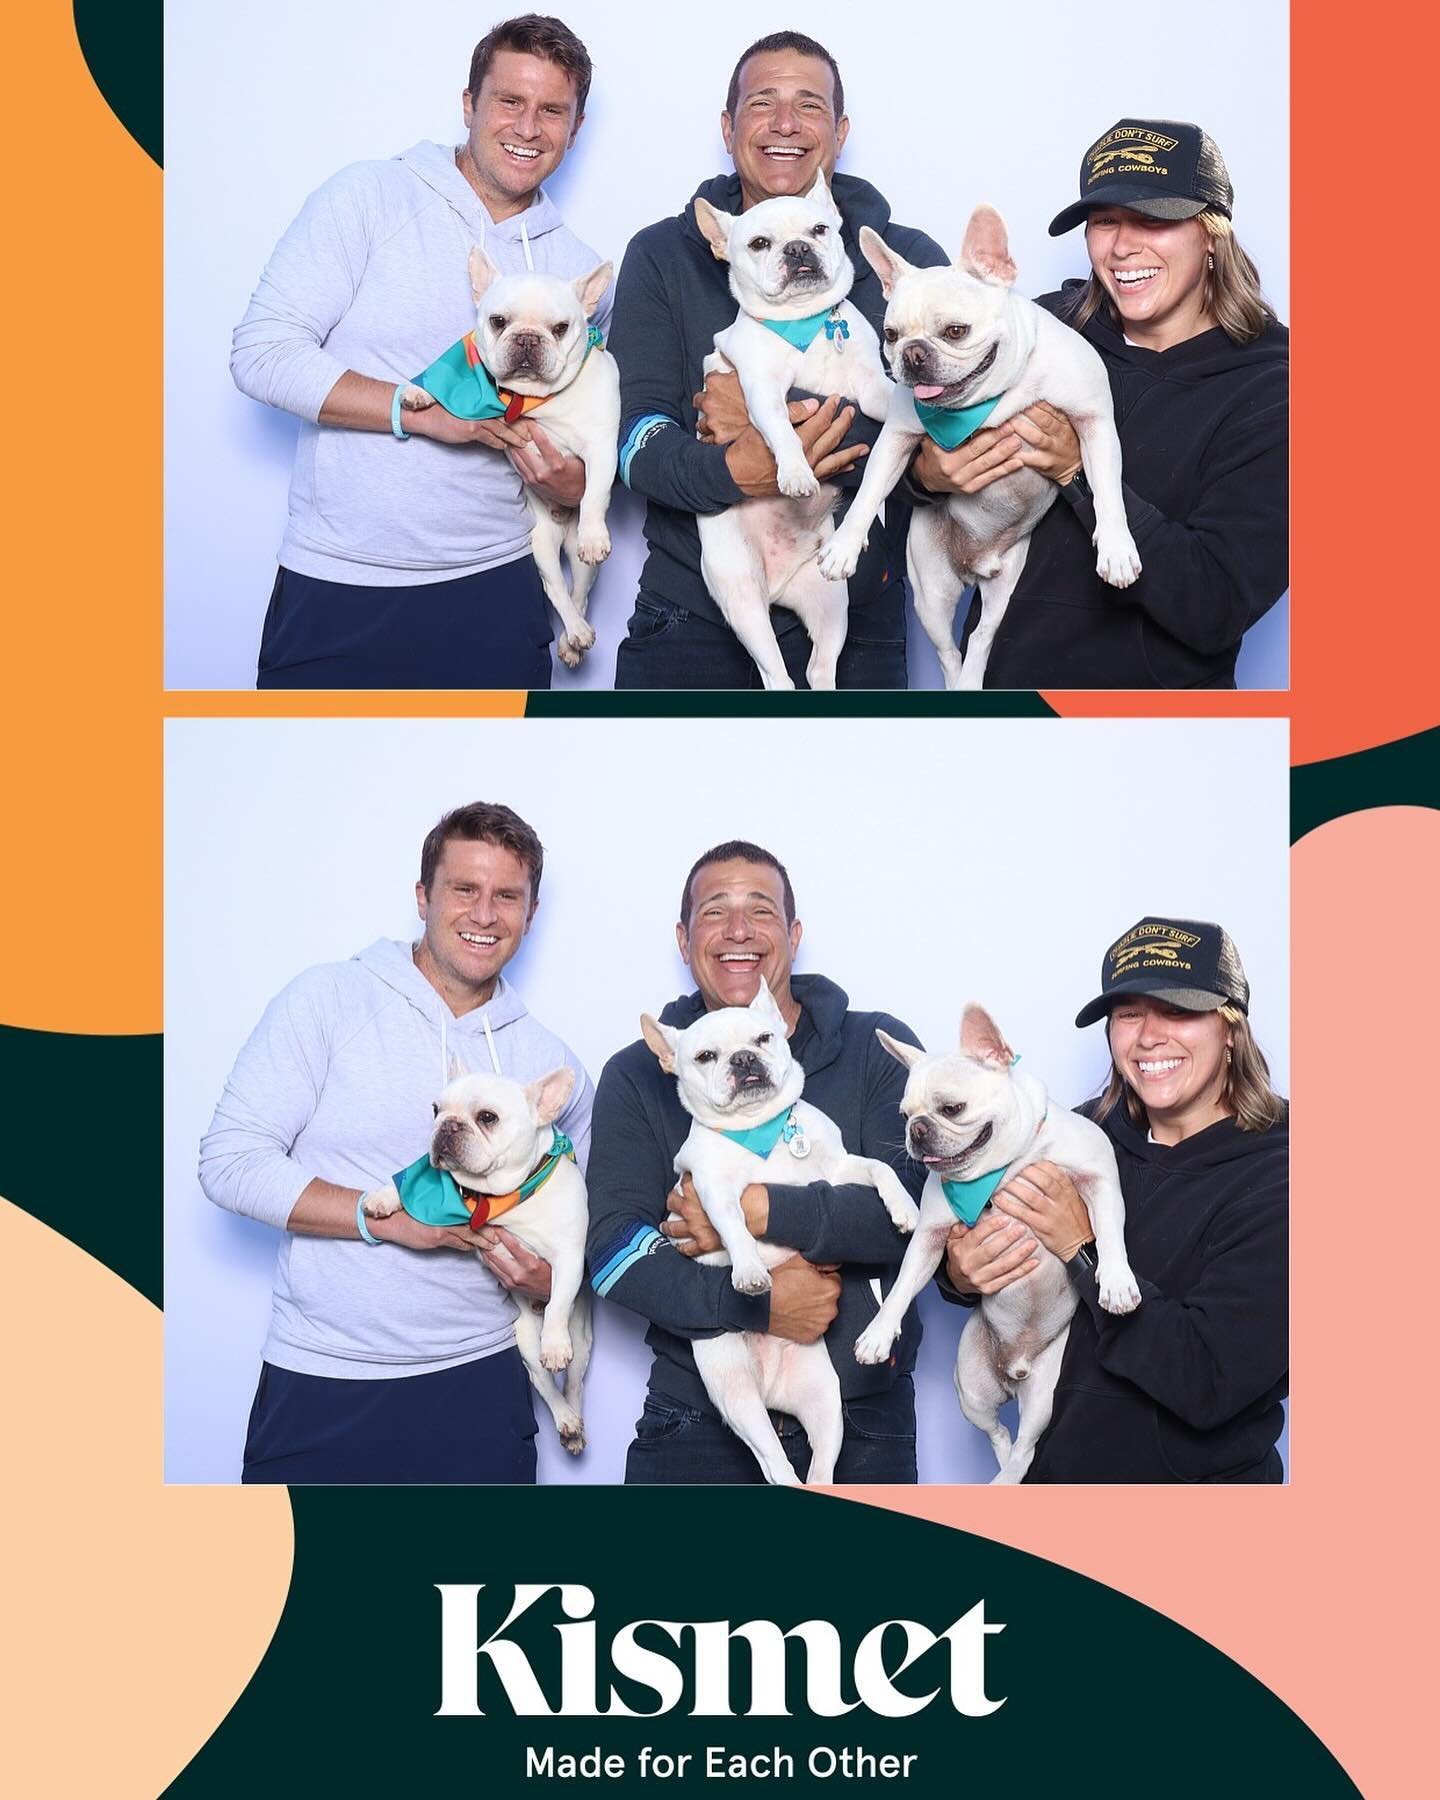 Which is your favorite furry photobooth companion from the @kismet x @dogppl event last week in Santa Monica? We are still smiling over here and in eager anticipation of next month&rsquo;s meetup!

#thewotp #wifeoftheparty #dogppl #kismet #johnlegend